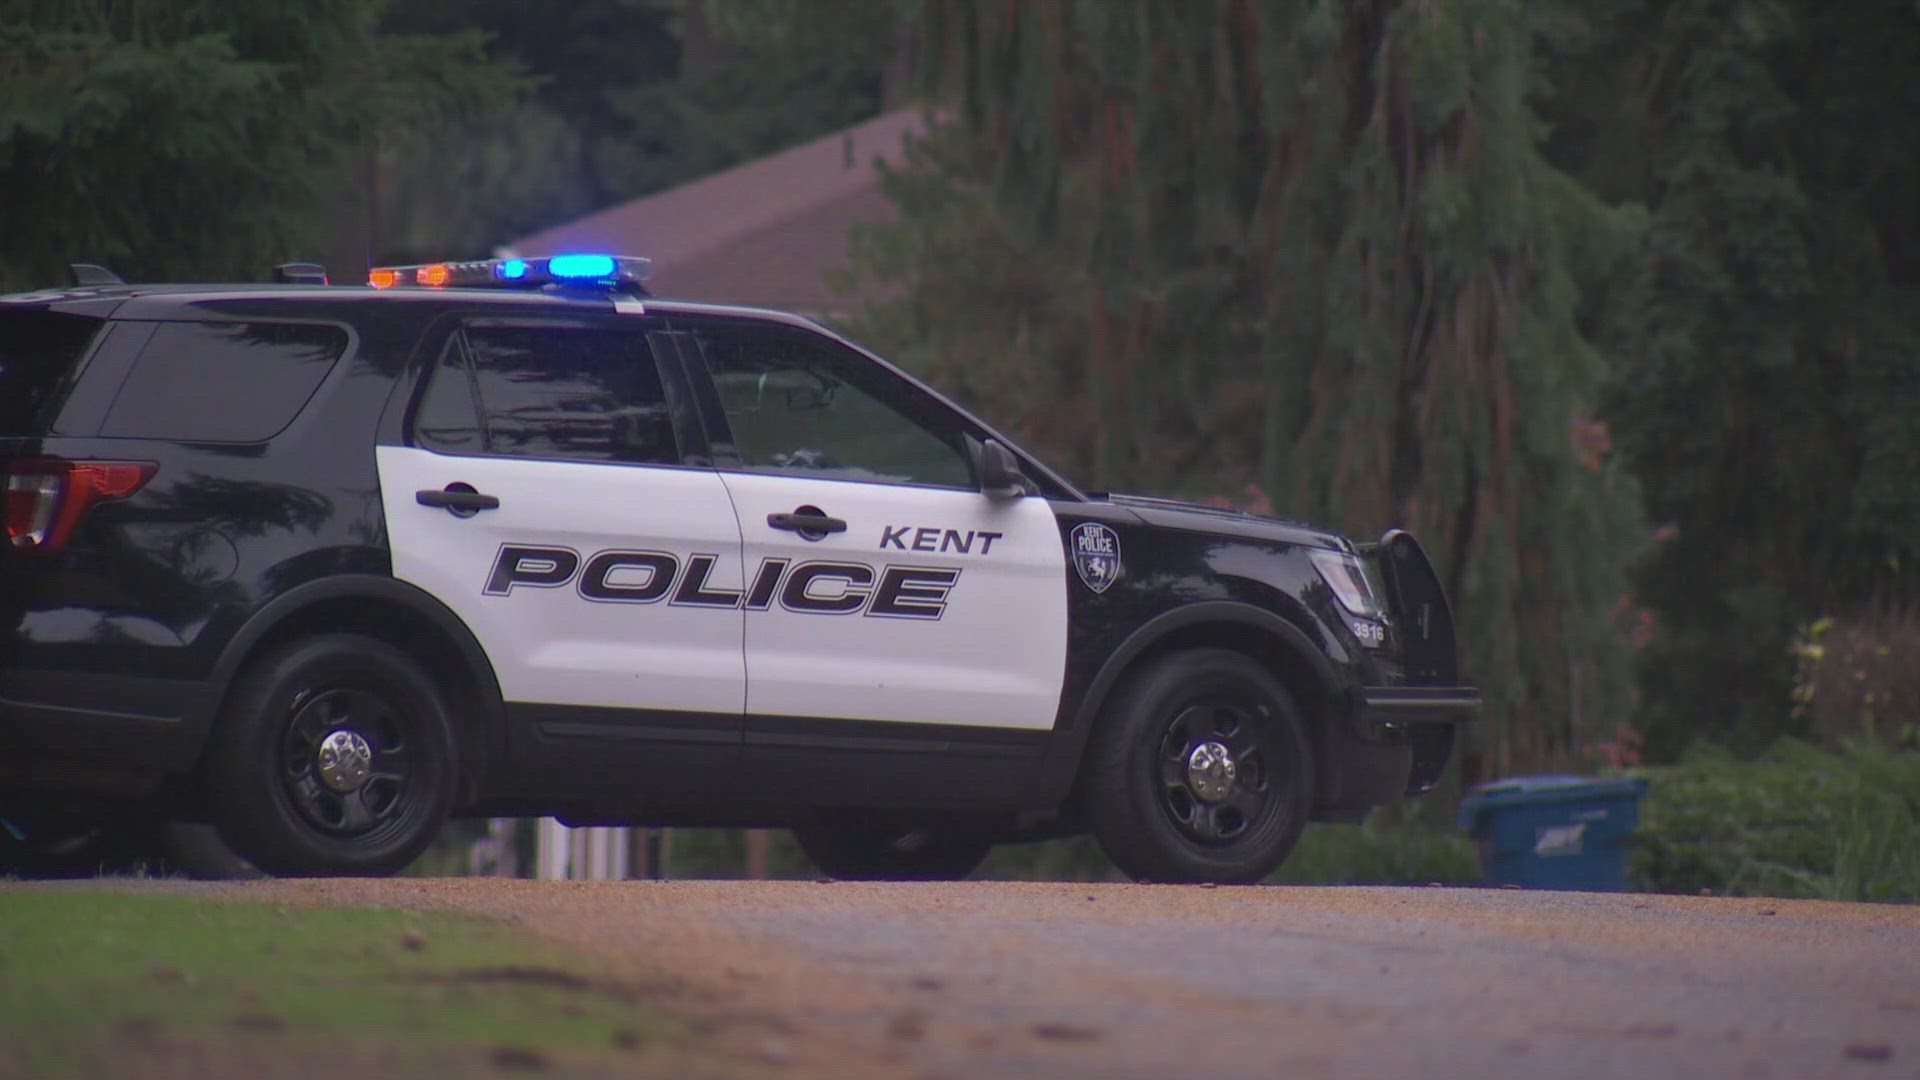 The officer involved is placed on paid administrative leave, according to the department.